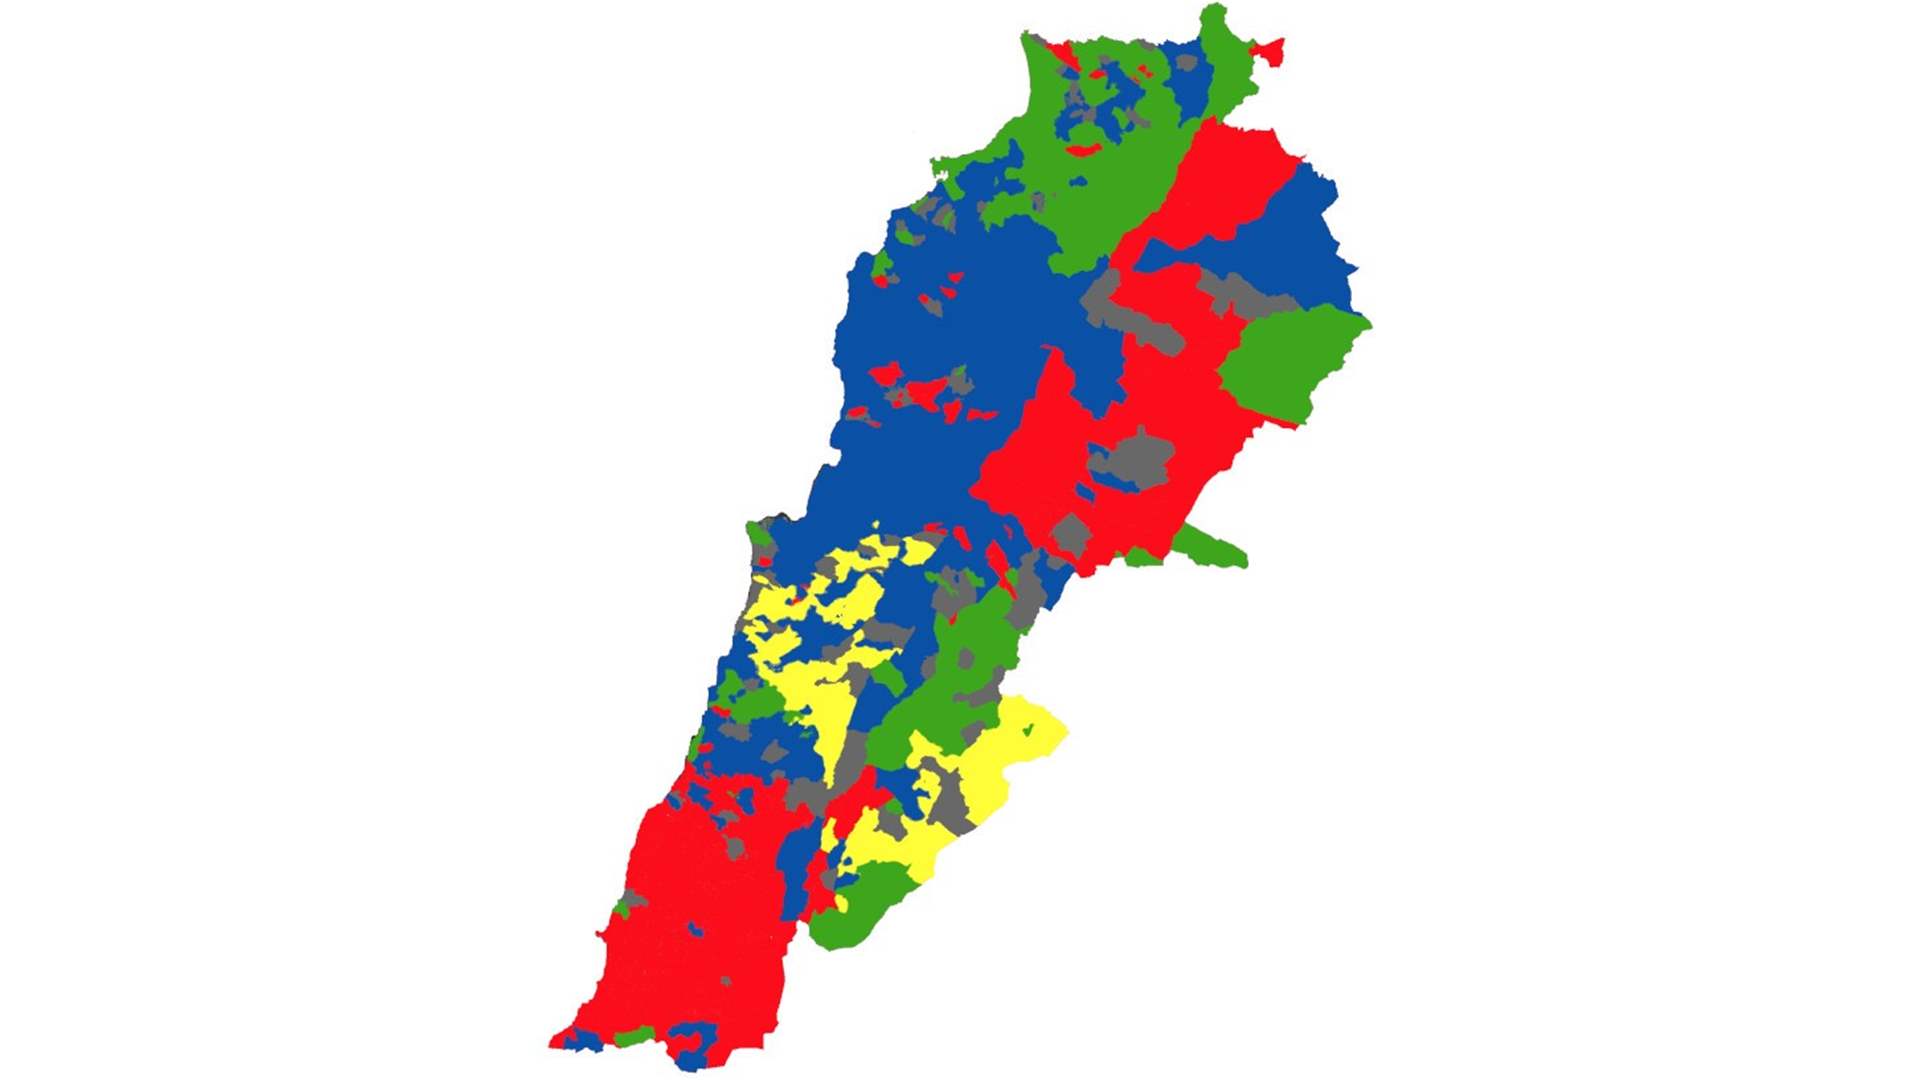 Political divide in Lebanon spurs discussion of federalism